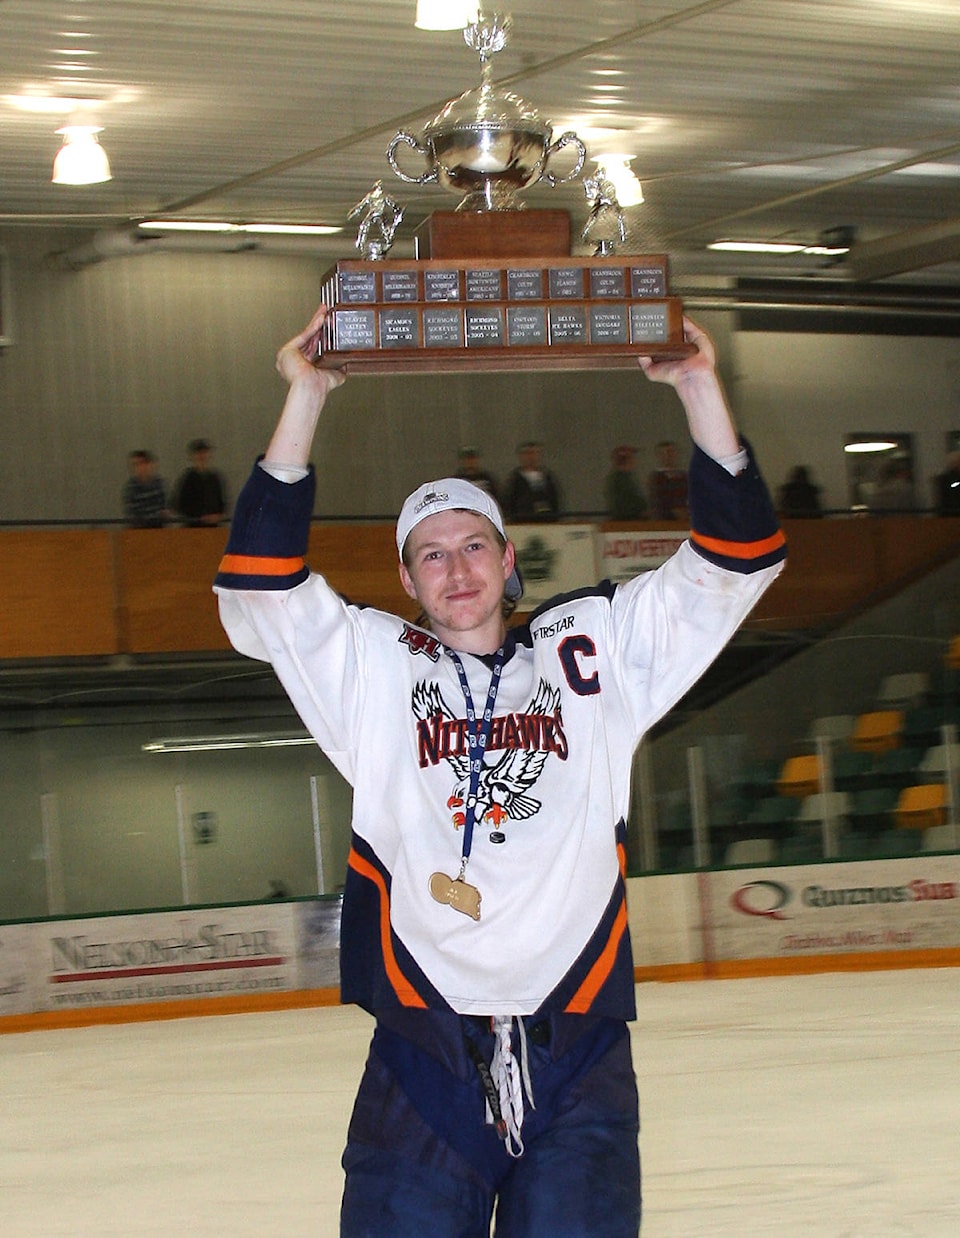 web1_170704-TDT-Archie-Cyclone-cup